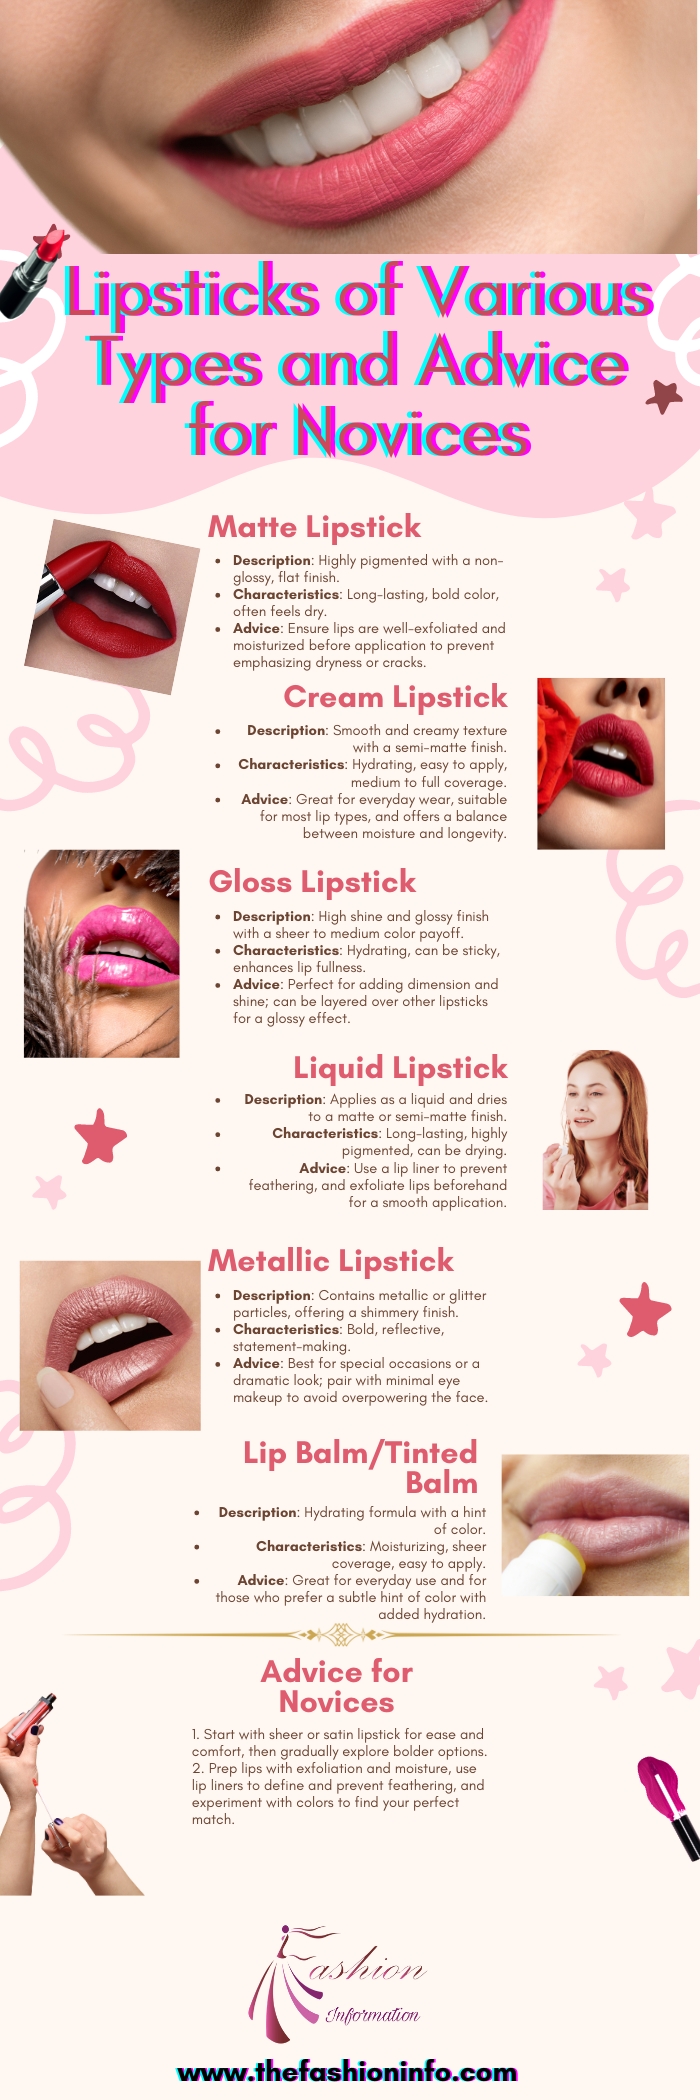 Lipsticks of Various Types and Advice for Novices